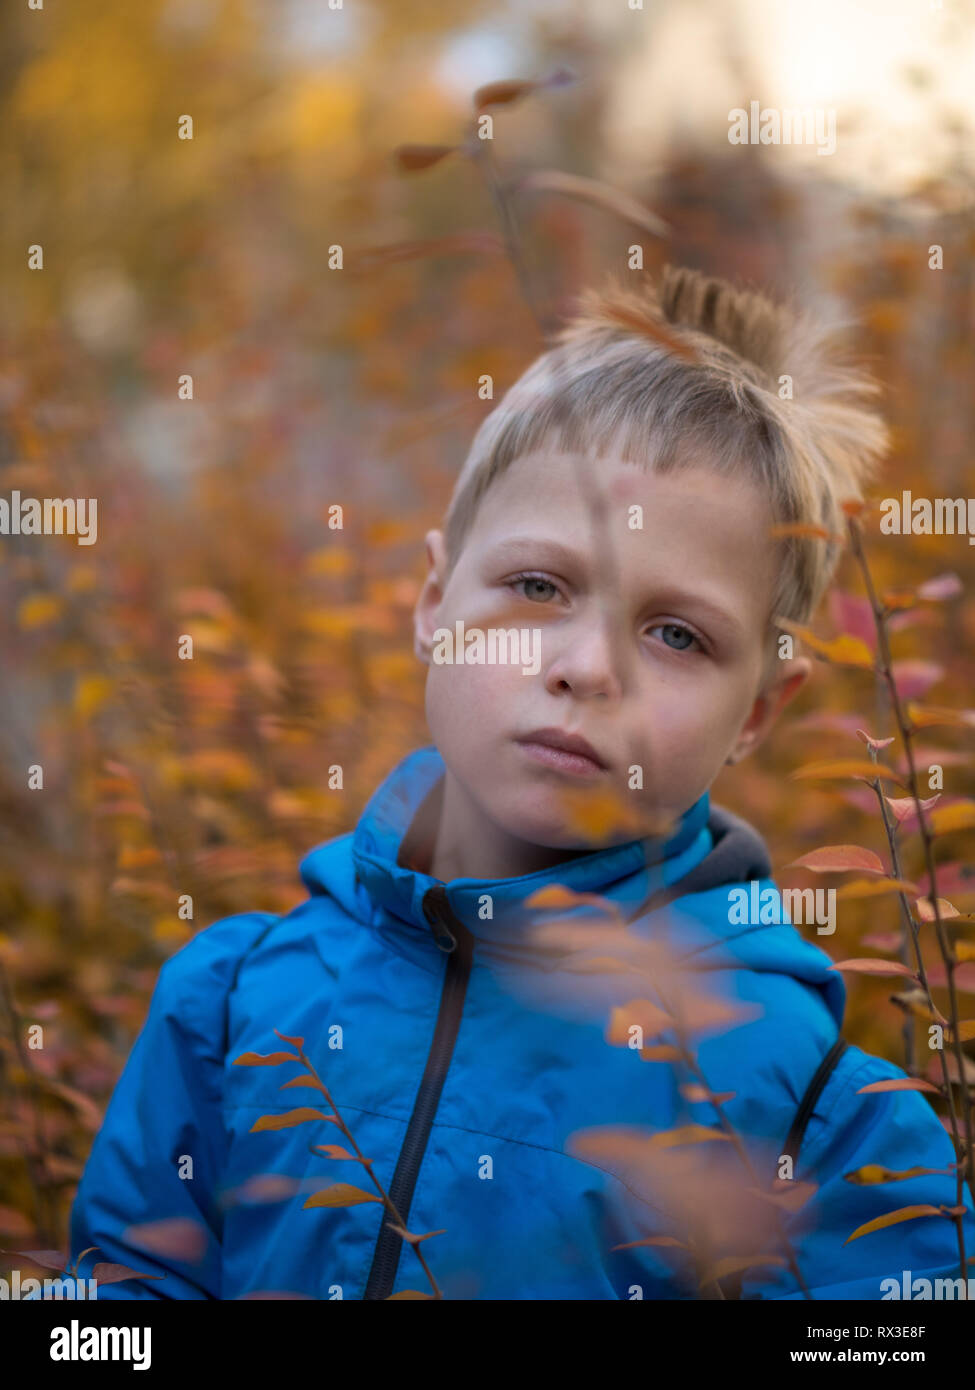 Sad boy 7 years old in the autumn park among the yellowed branches and leaves. Stock Photo